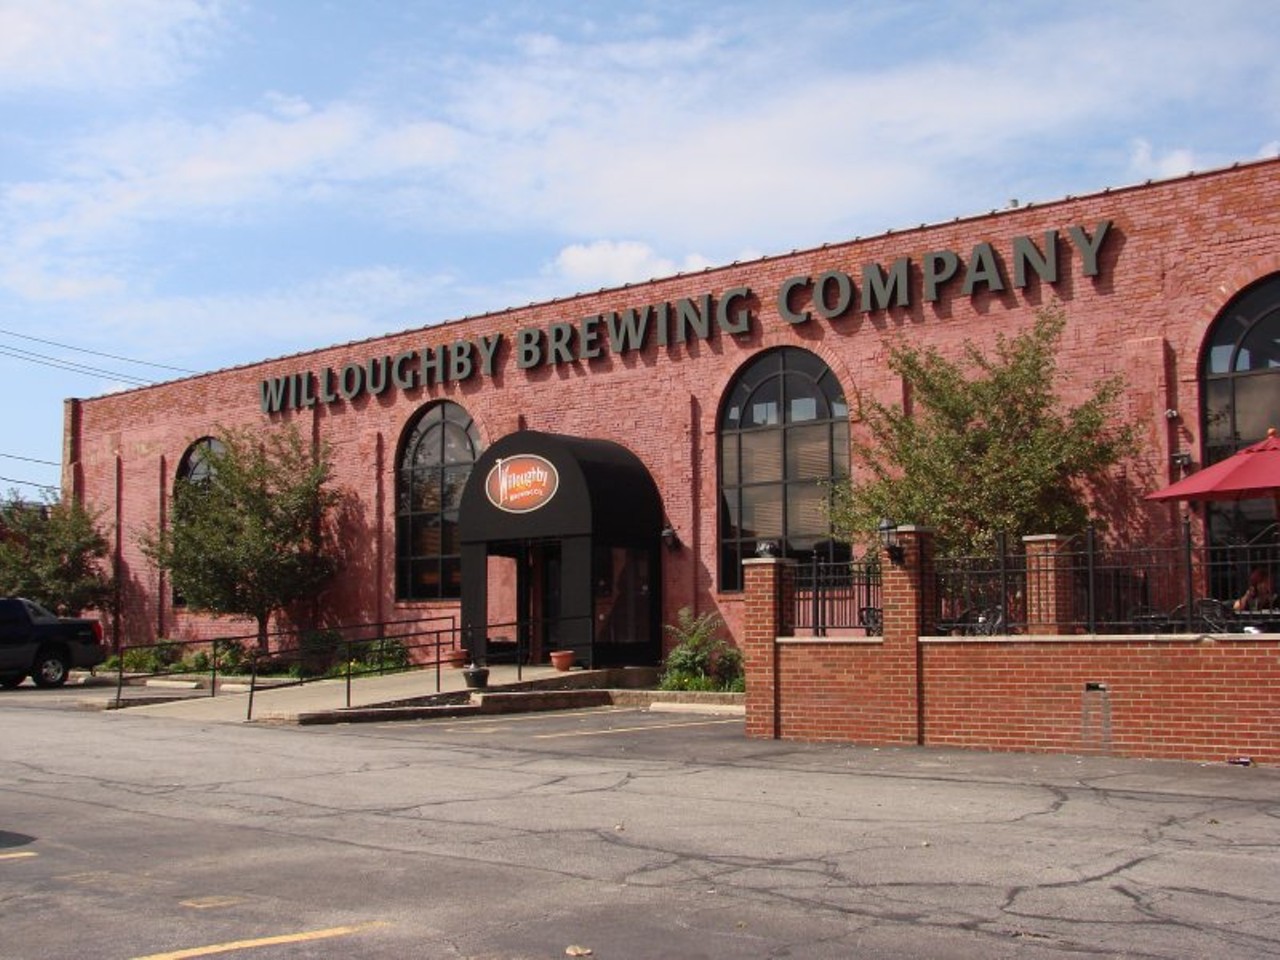  Willoughby Brewing Company
4057 Erie St., Willoughby
In an area lauded for its craft beers, the contest for "Best Local Beer" is a tough one. But Willoughby Brewing Co., which has been slinging its Peanut Butter Cup Porter for years now, is no slouch. The eastside staple consistently ranks high on lists of our favorite breweries in town and the most underrated gems around here. You'll always feel welcome when you slip into a booth at Willoughby.
Photo via Willoughby Brewing Company/Facebook